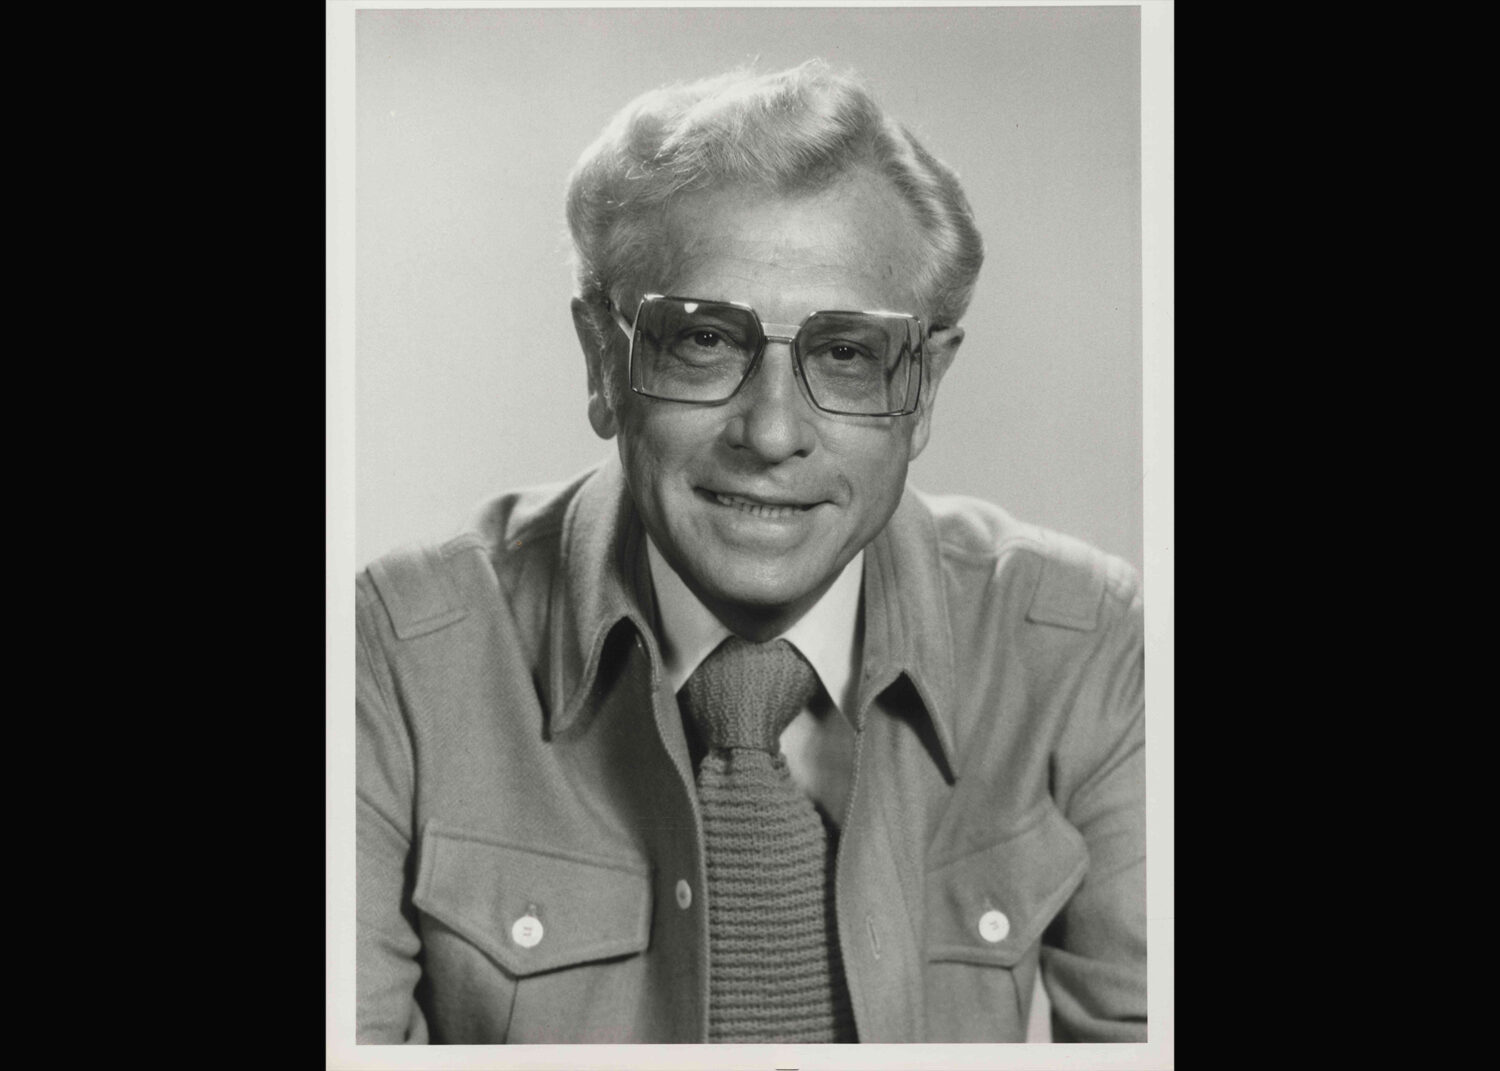 Allen Ludden, host of the television game show Password